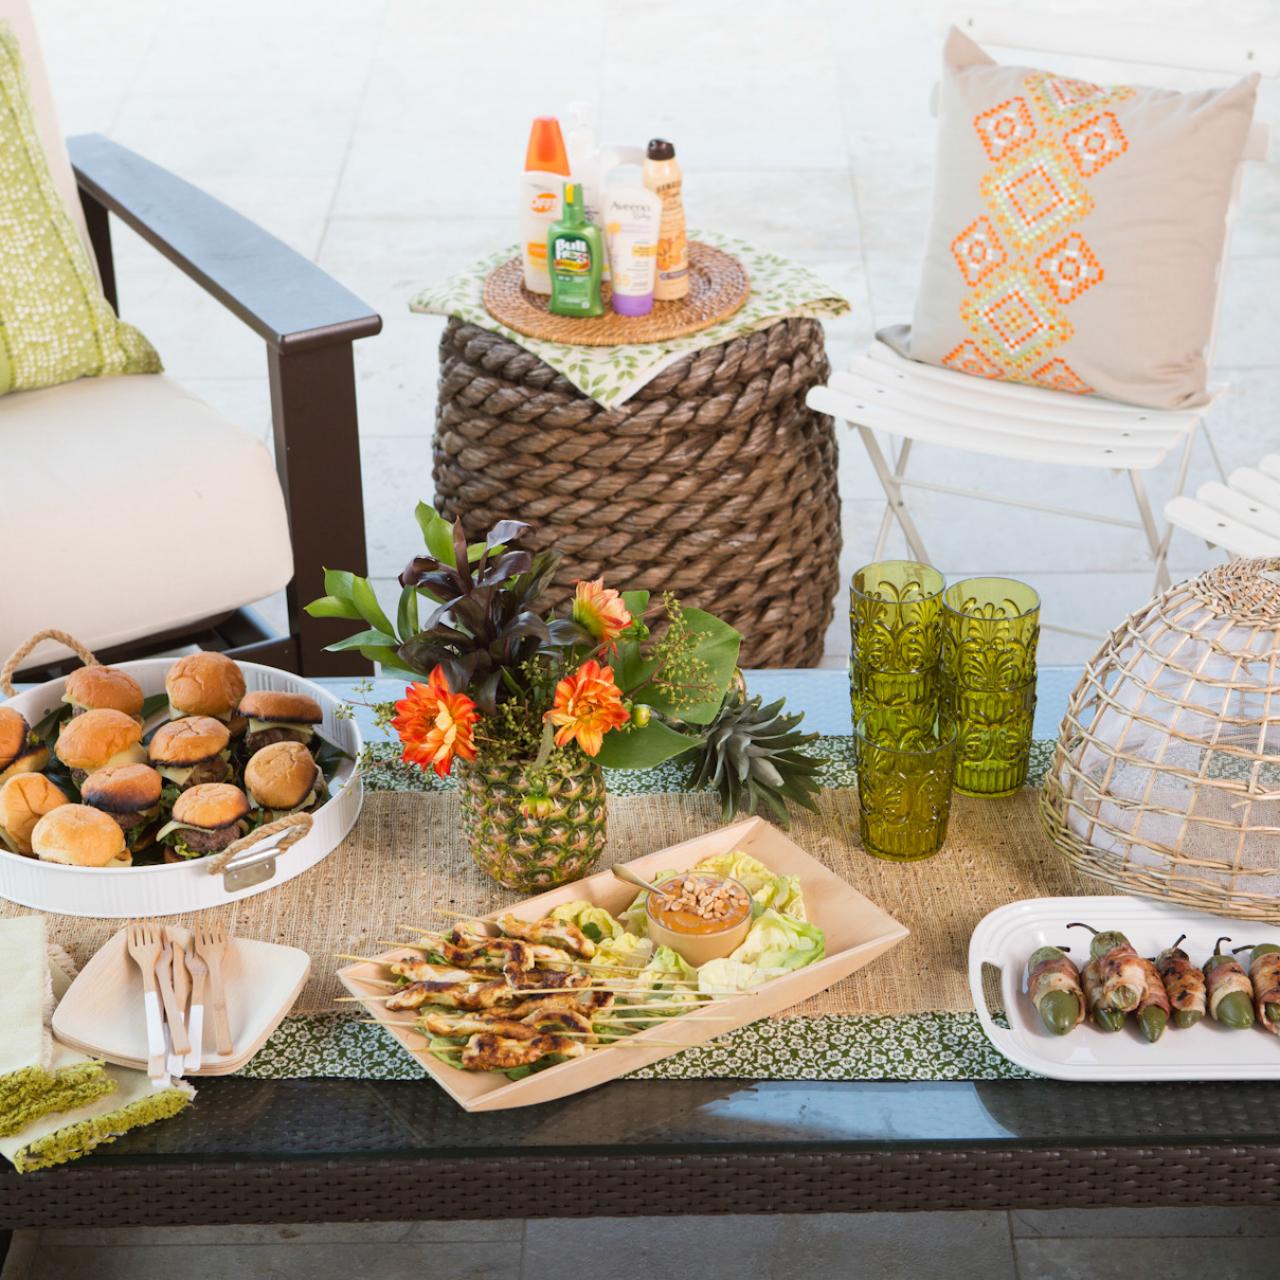 How to Host a Luau-Inspired Summer Pool Party